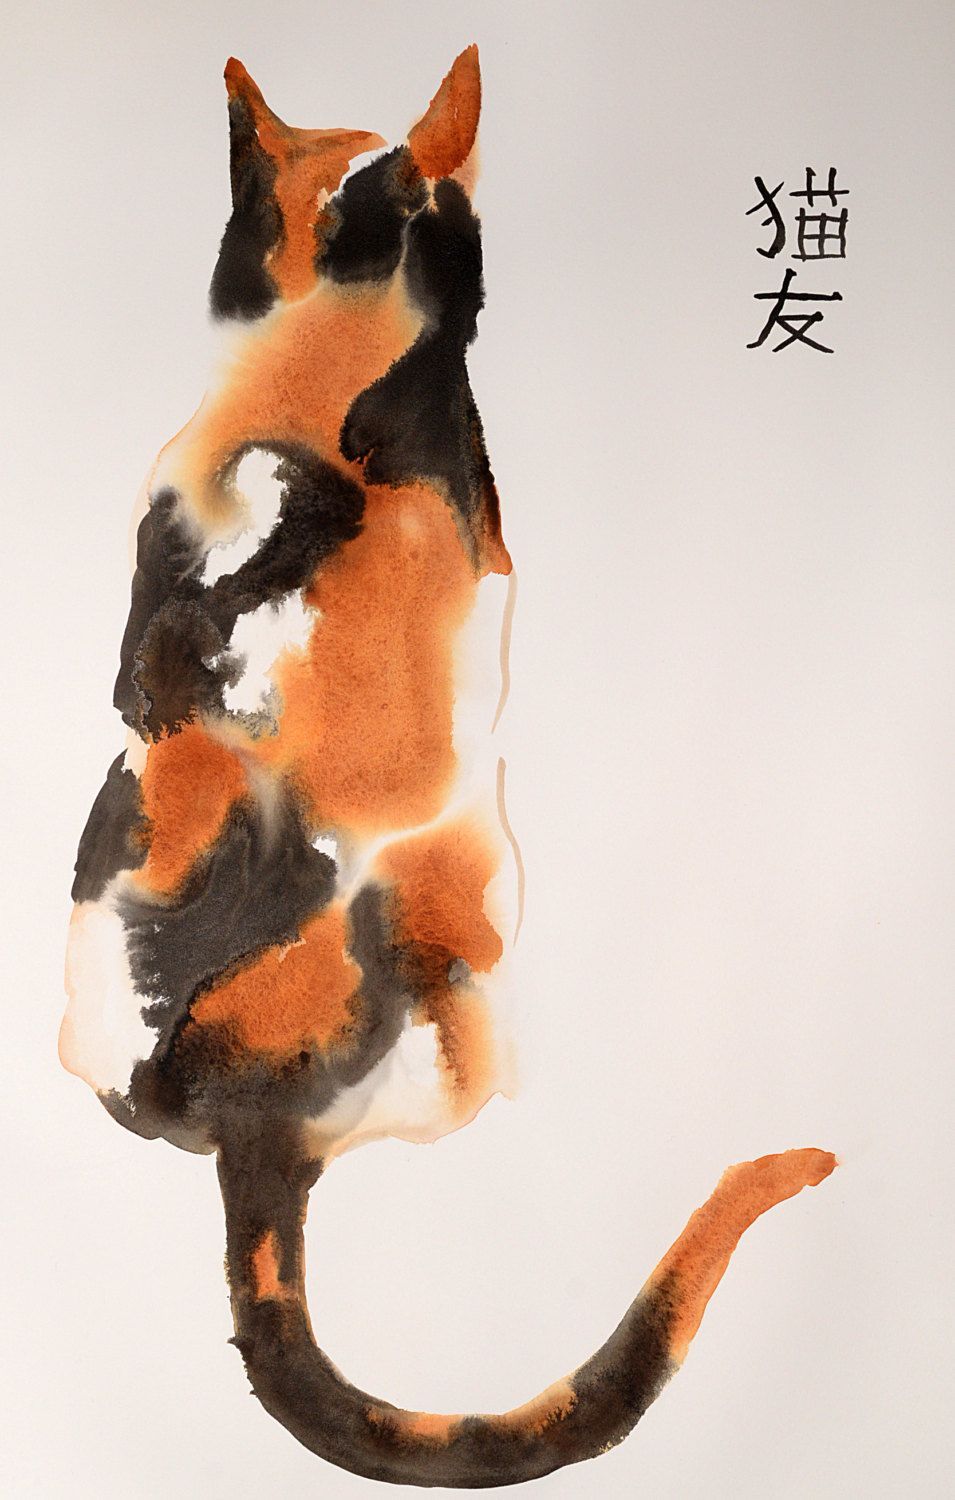 Beautiful calico cat original ink and watercolor mixed by bodorka -   20 calico cat tattoo ideas